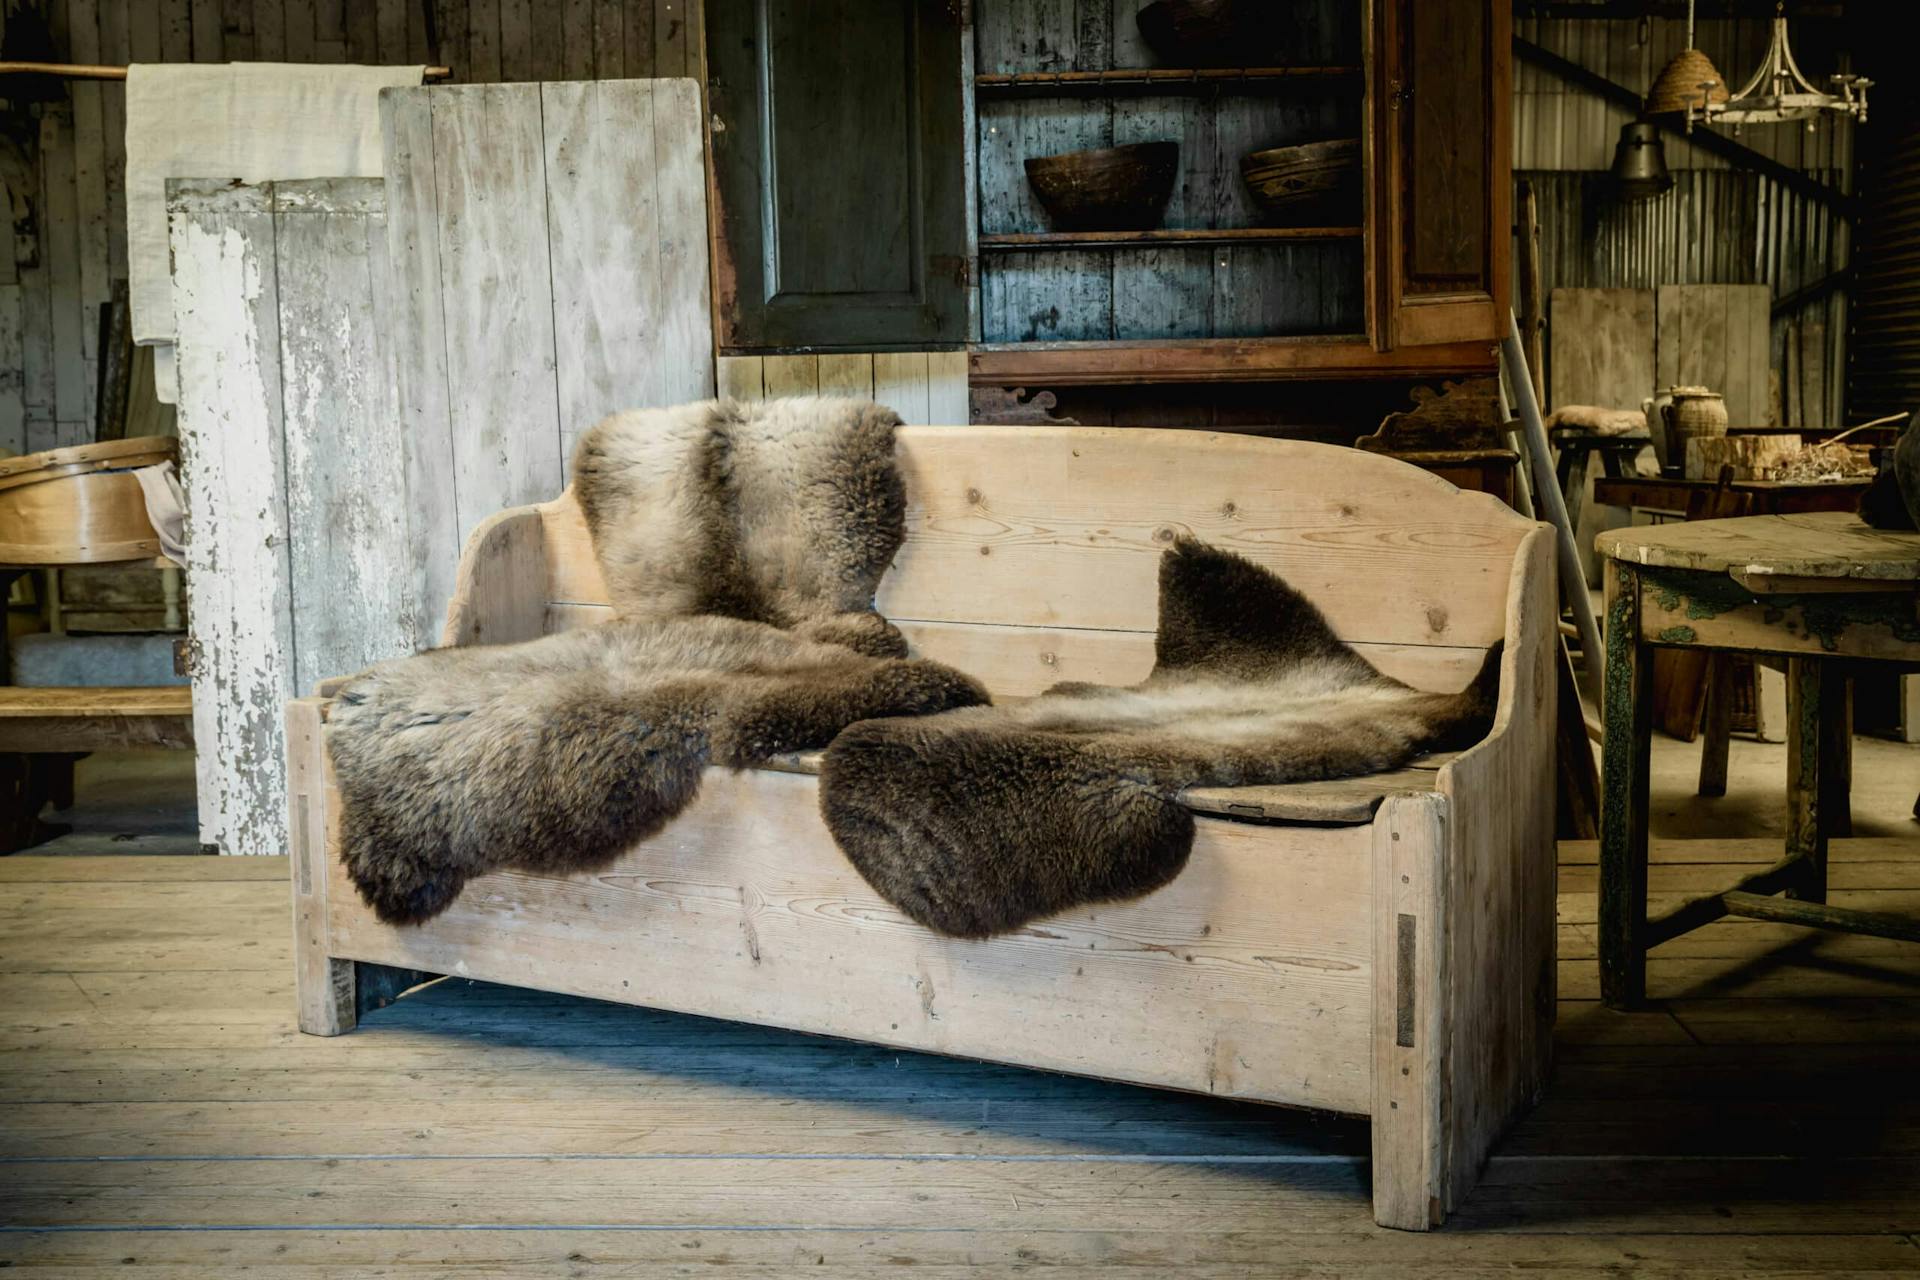 Original Pitch Pine Bench from the Jämtland area of Sweden